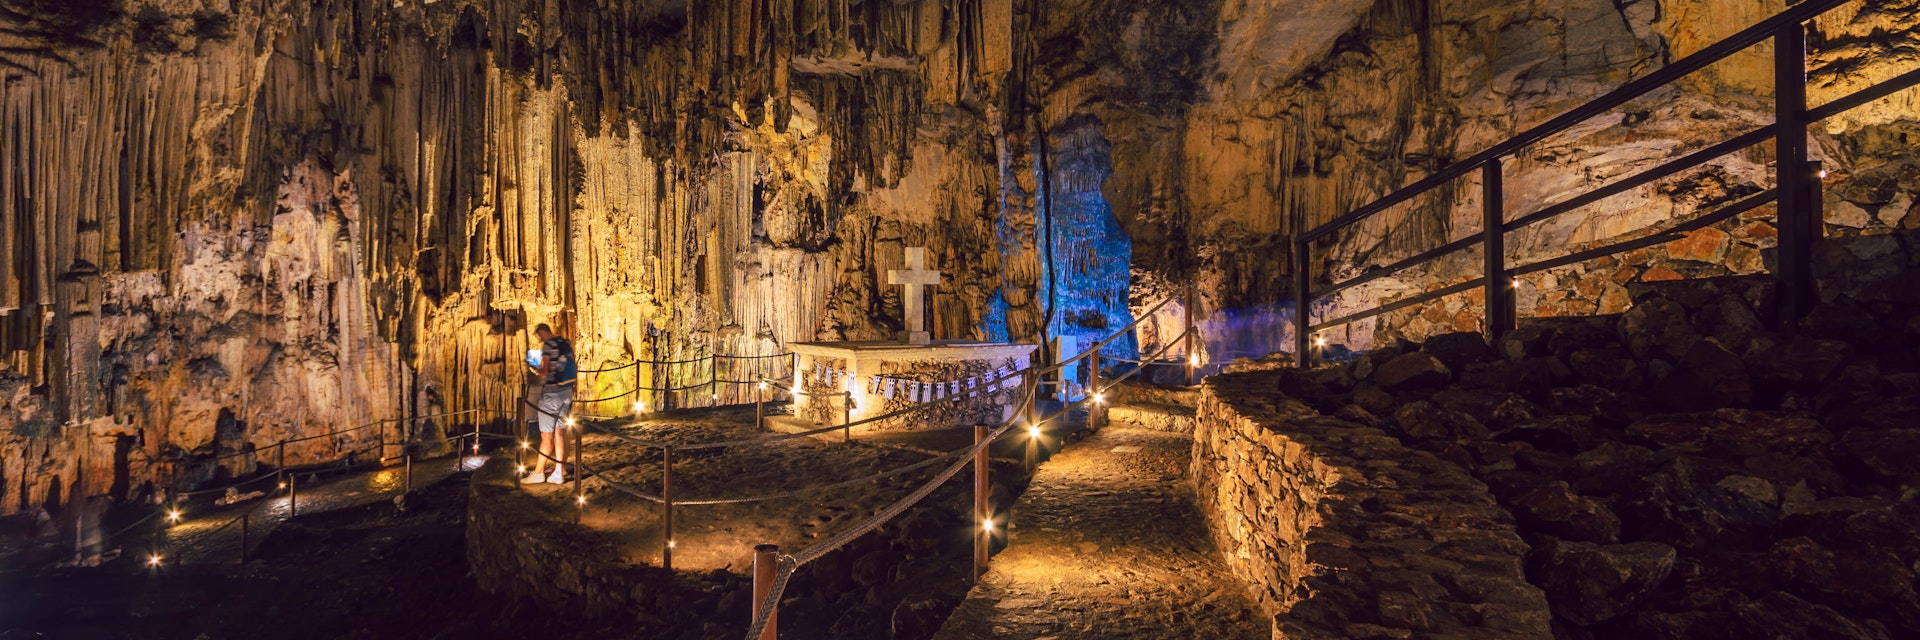 Melidoni Crete September 1 2019-Melidoni cave, an amazing historical and archaeological cave with the impressive formations of the stalactites and stalagmites.; Shutterstock ID 1501663331; your: Barbara Di Castro; gl: 65050; netsuite: digital; full: poi
1501663331